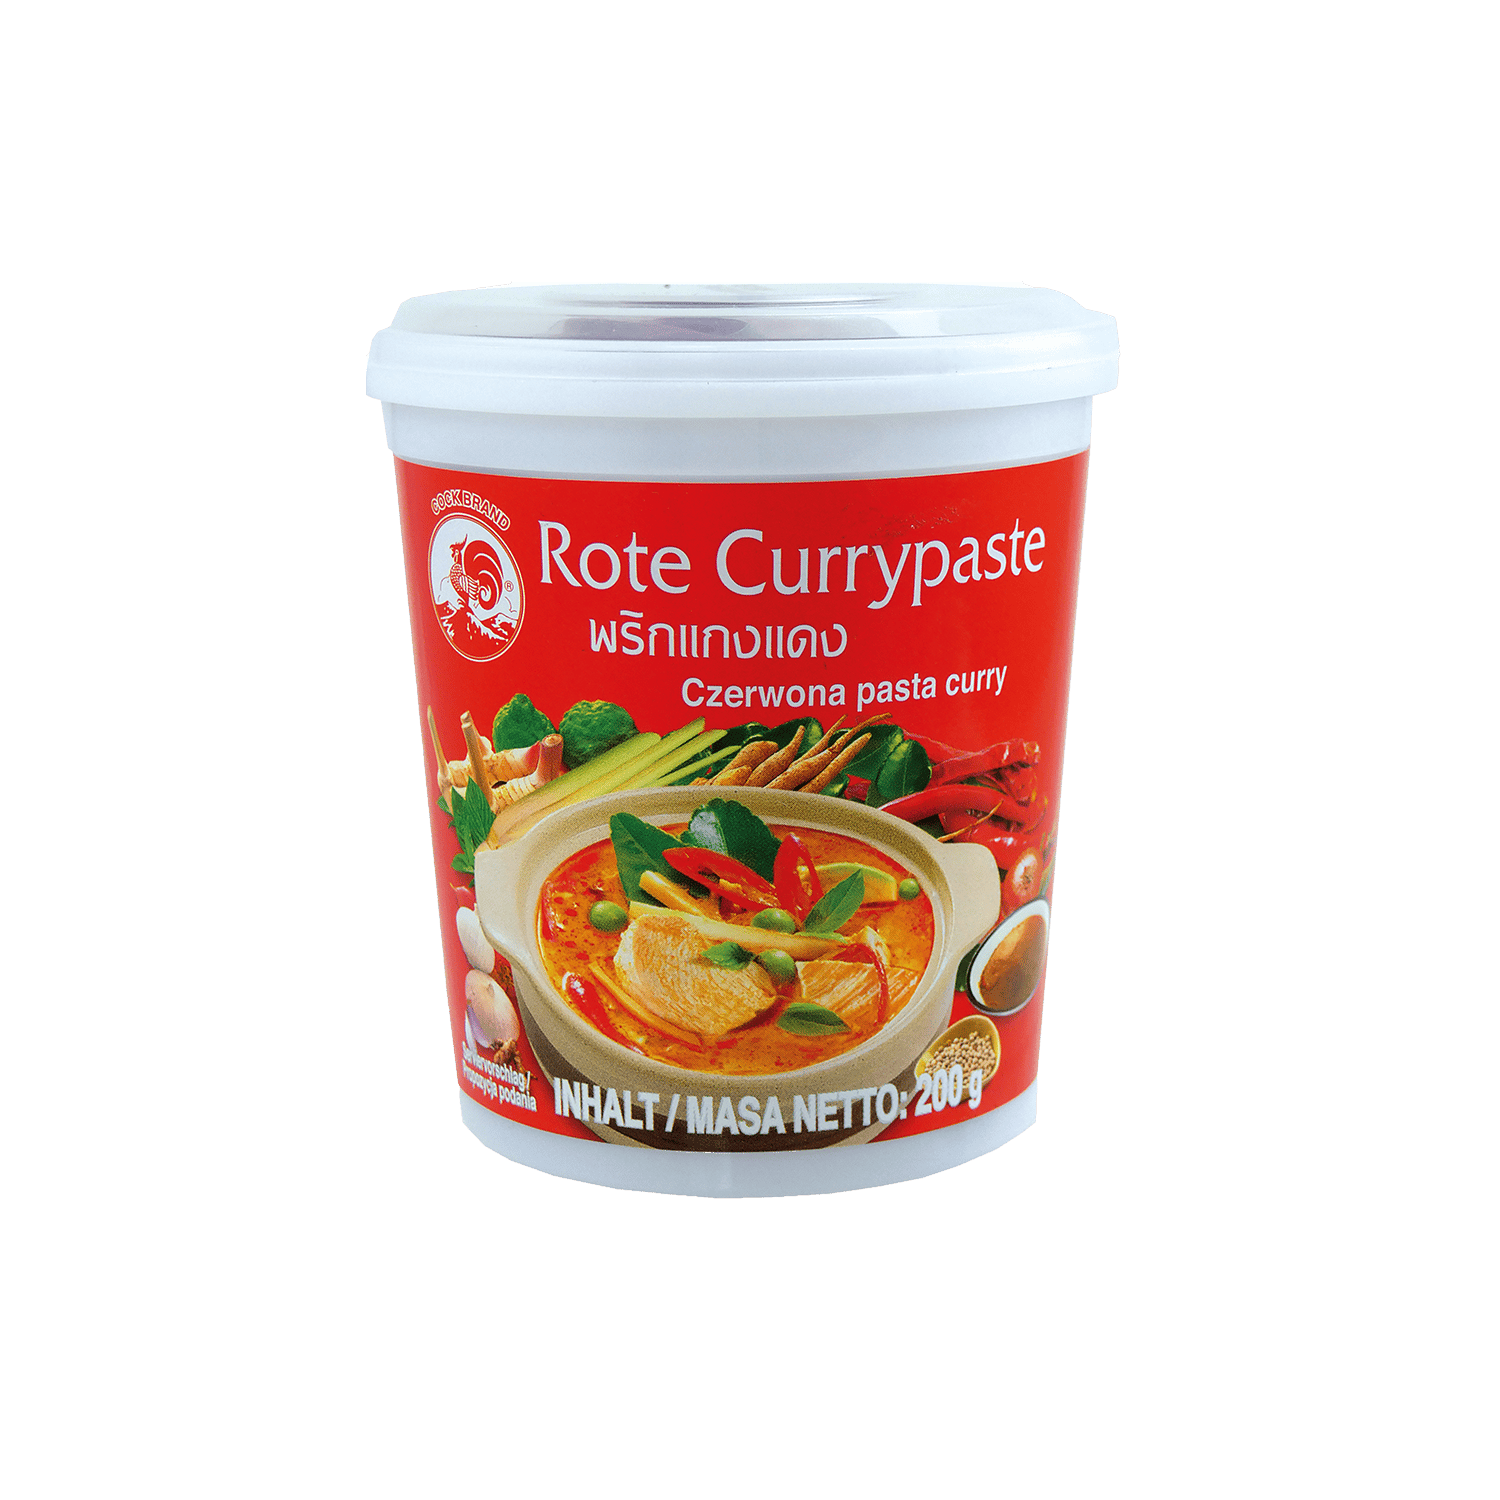 Currypaste Rot, 200g